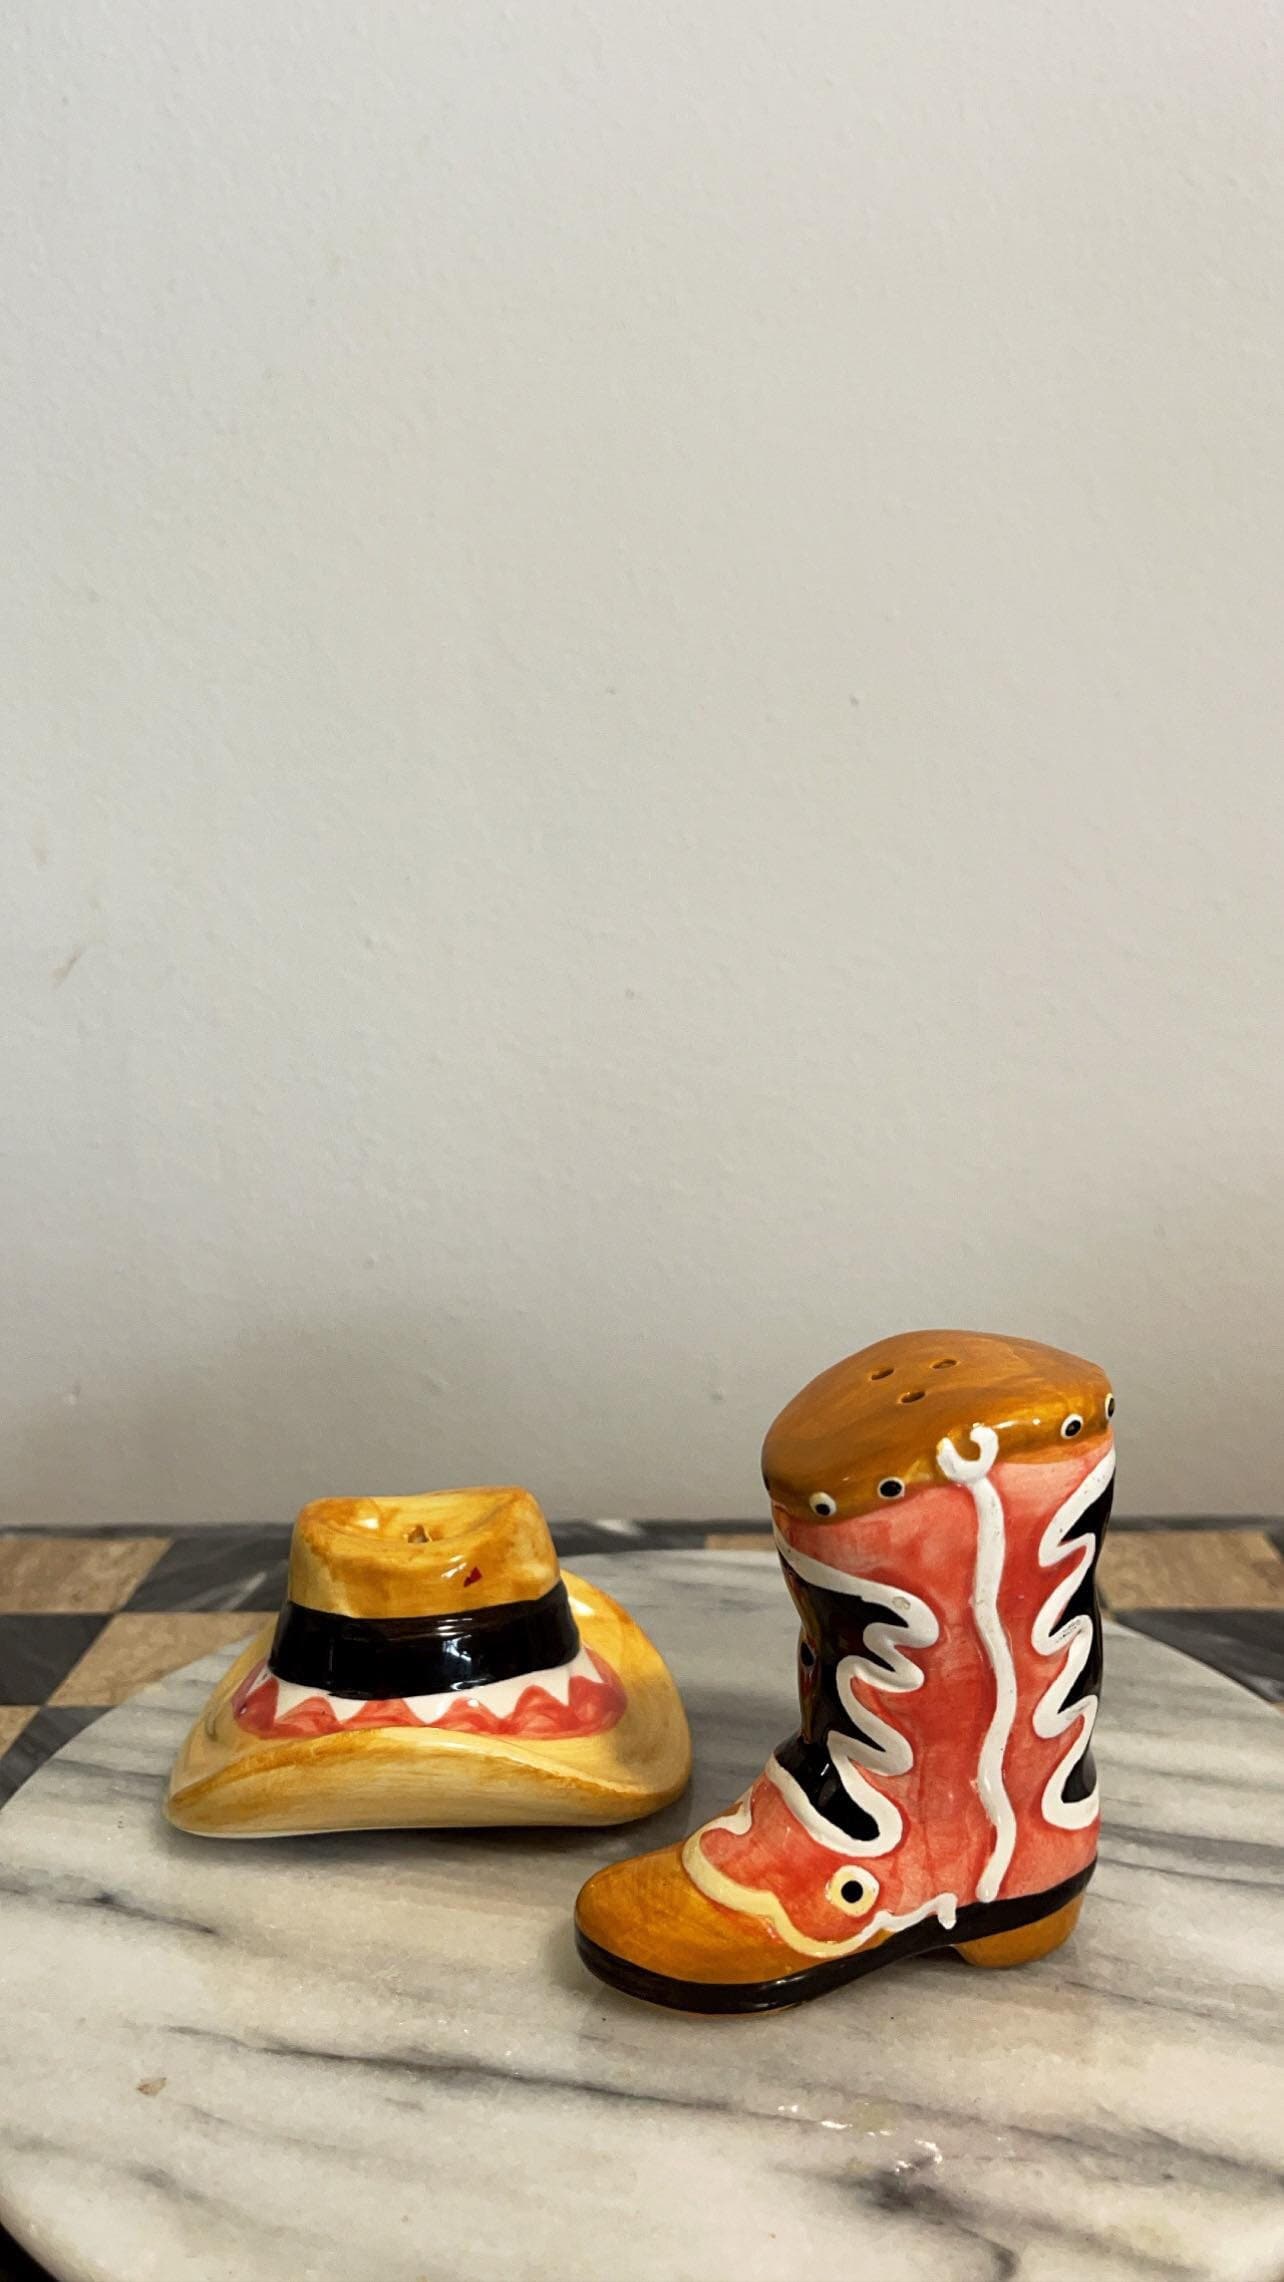 Fancy Cowboy Boot Salt and Pepper Shaker Set or Decorative Display Stand  Figurine with Spur & Texas Star for Country Western Kitchen Decor and Table